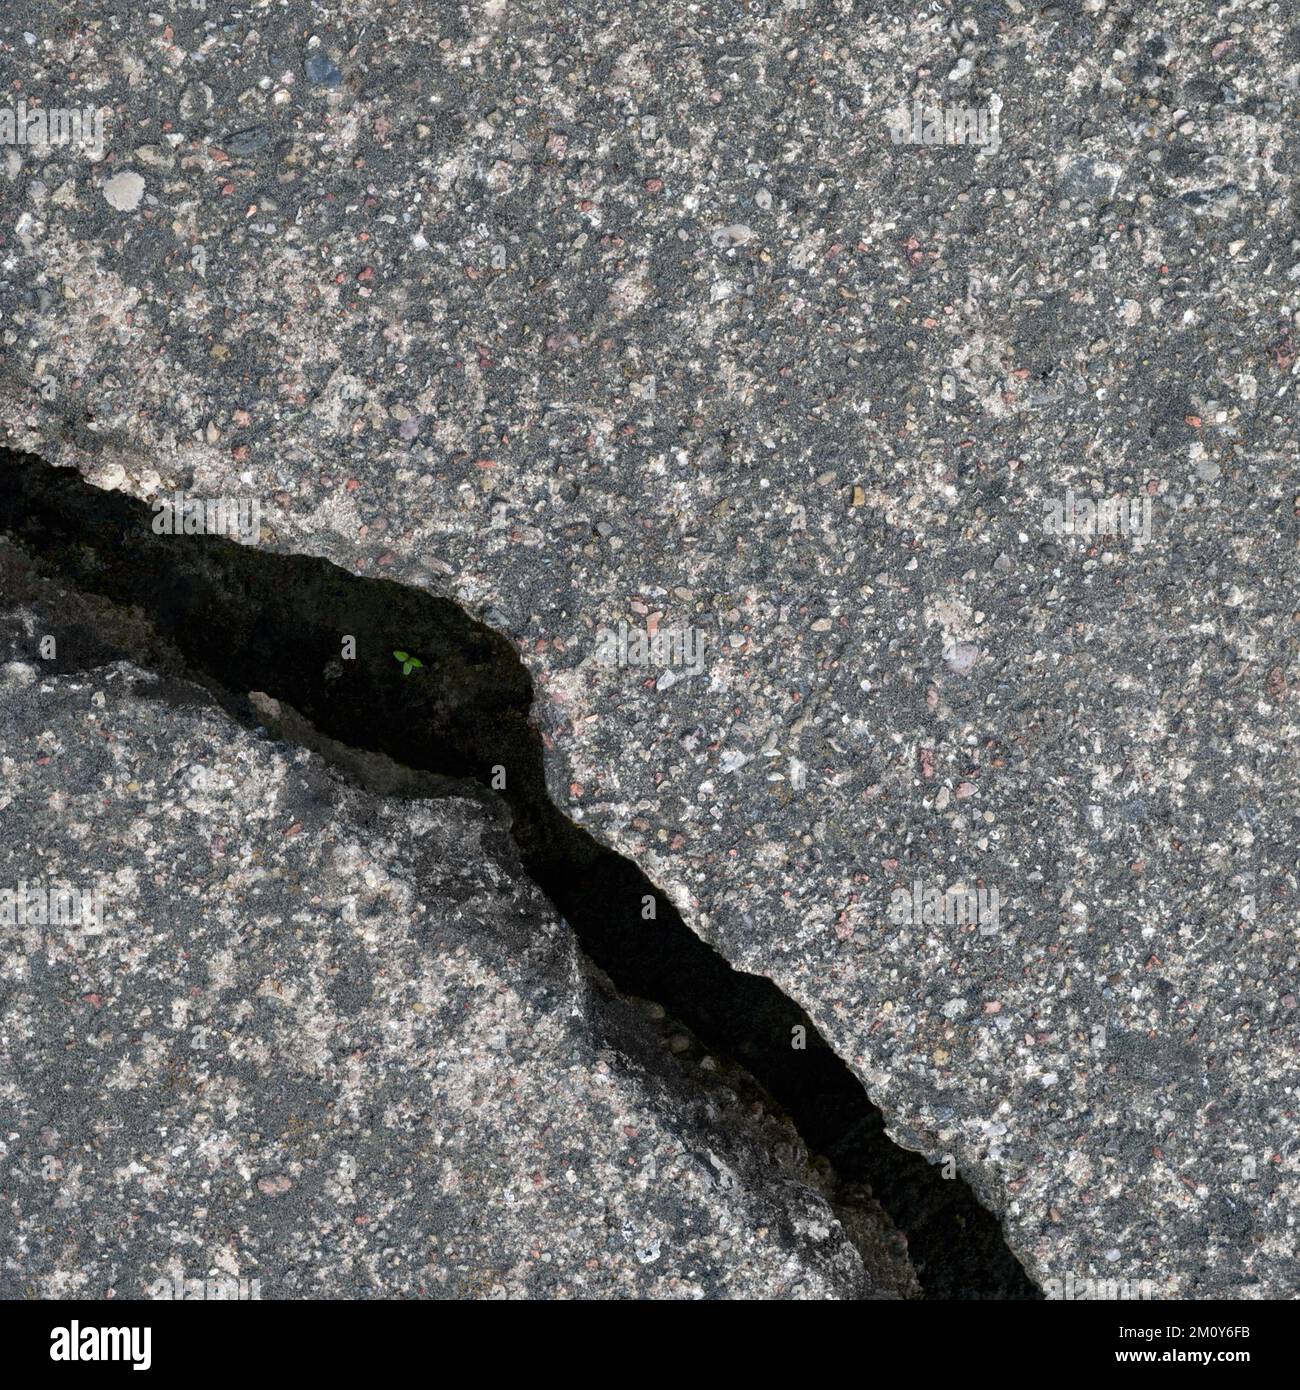 Old aged weathered cracked grey black tarmac texture pattern, large detailed damaged textured asphalt grungy background flat lay, tiny green leaves Stock Photo